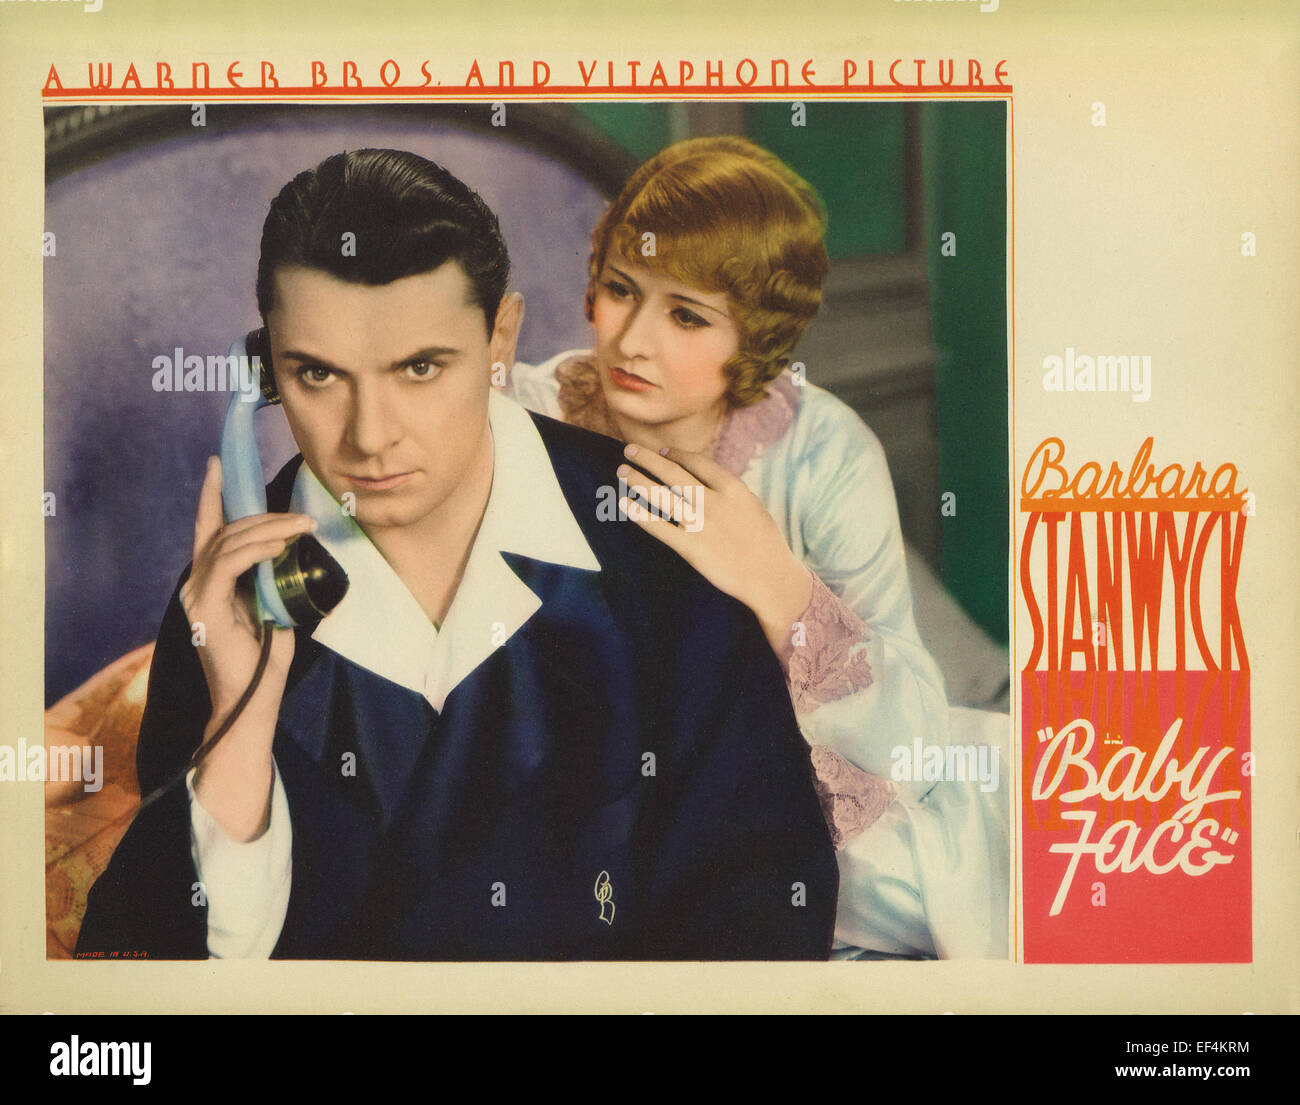 Baby Face - Barbara Stanwyck - Movie Poster Banque D'Images